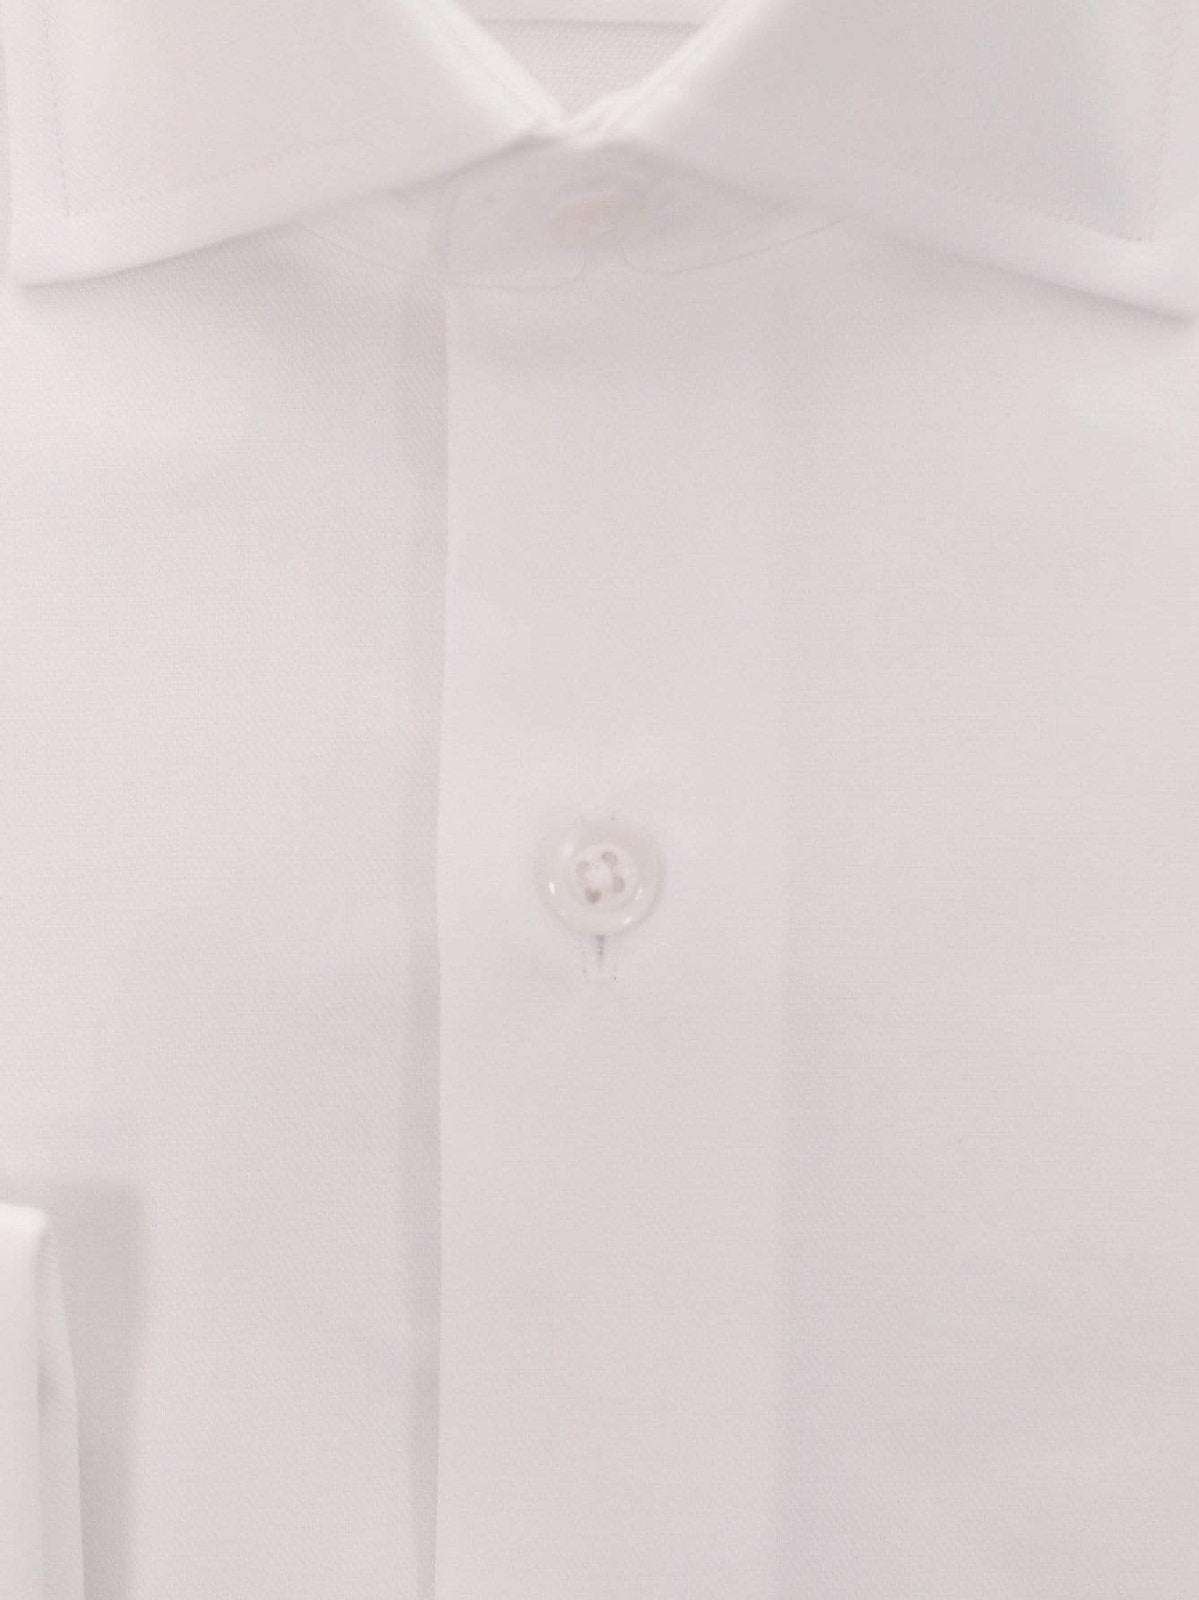 Christopher Lena Bestselling Items Slim Fit Solid White French Cuff Wrinkle Free 80&#39;s 2ply Cotton Dress Shirt